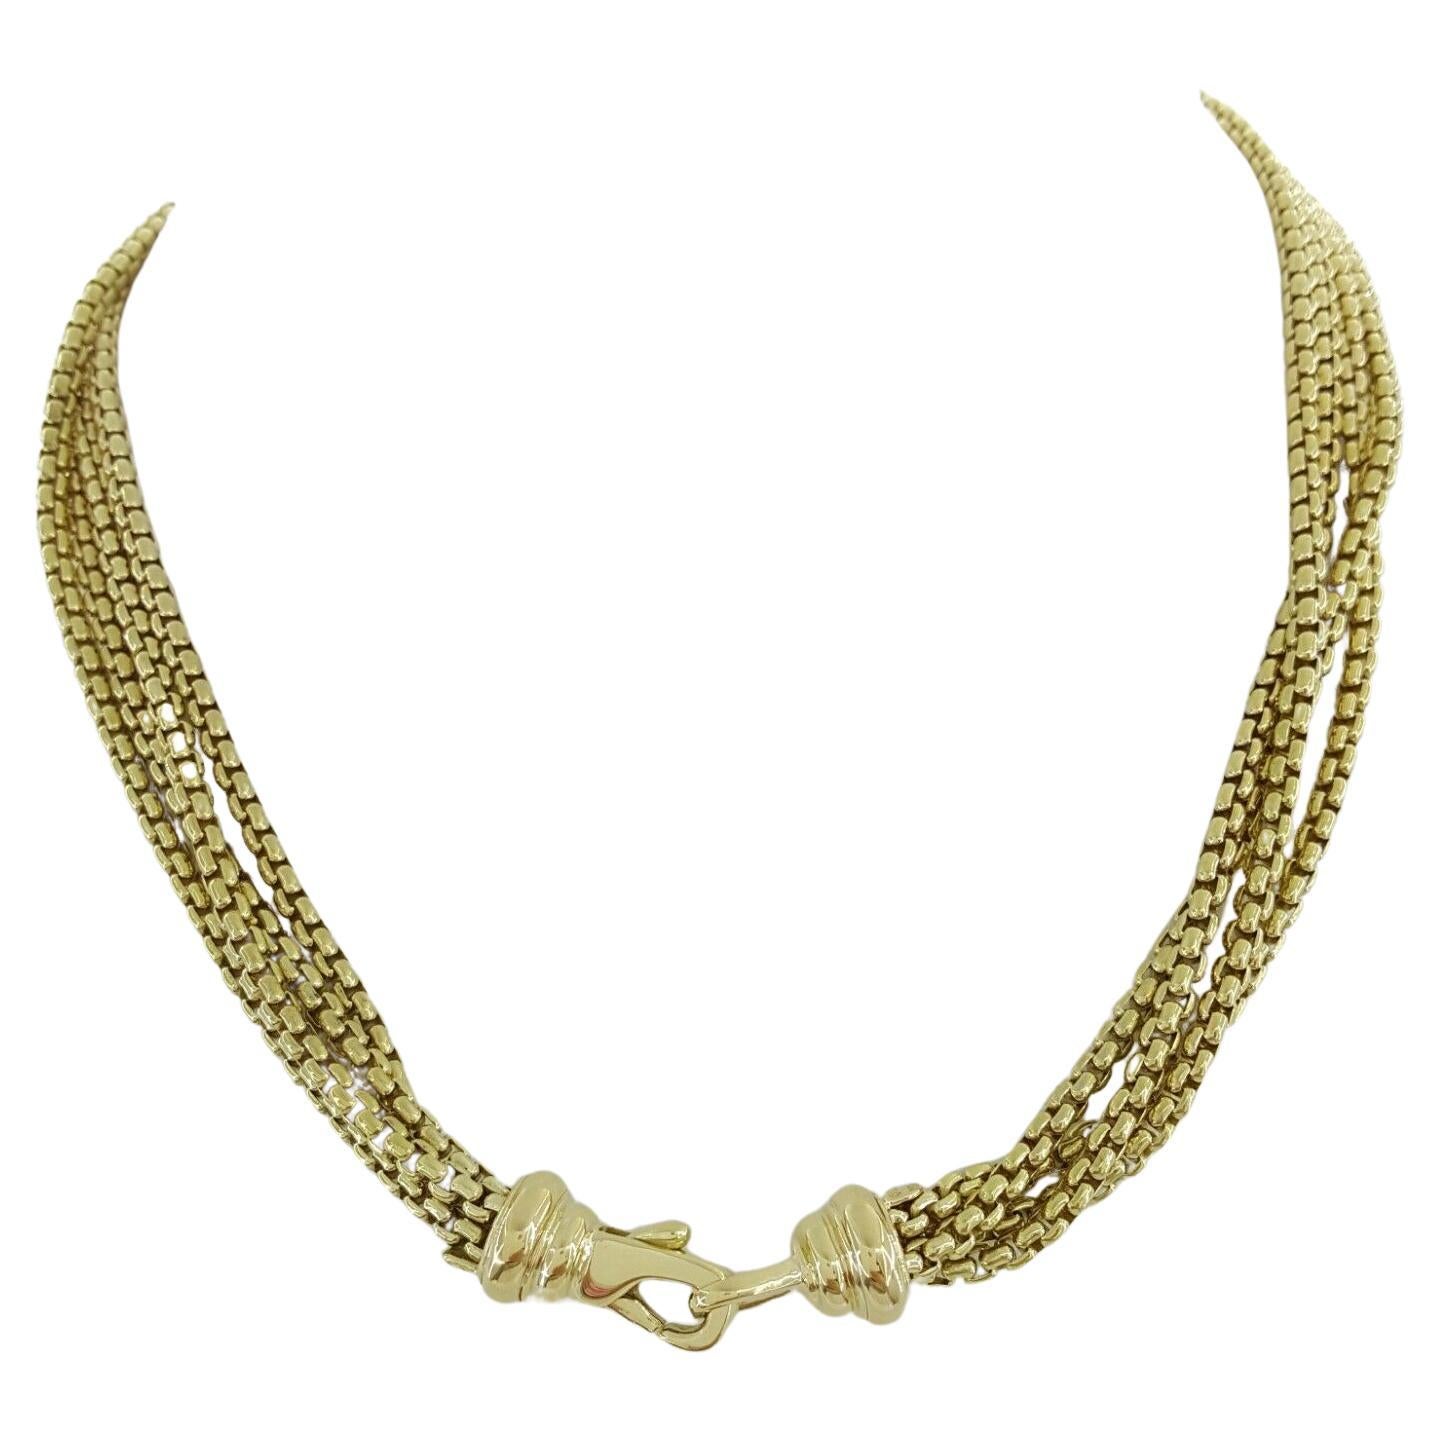  David Yurman 18k Yellow Gold Multi Cable Chain Necklace For Sale